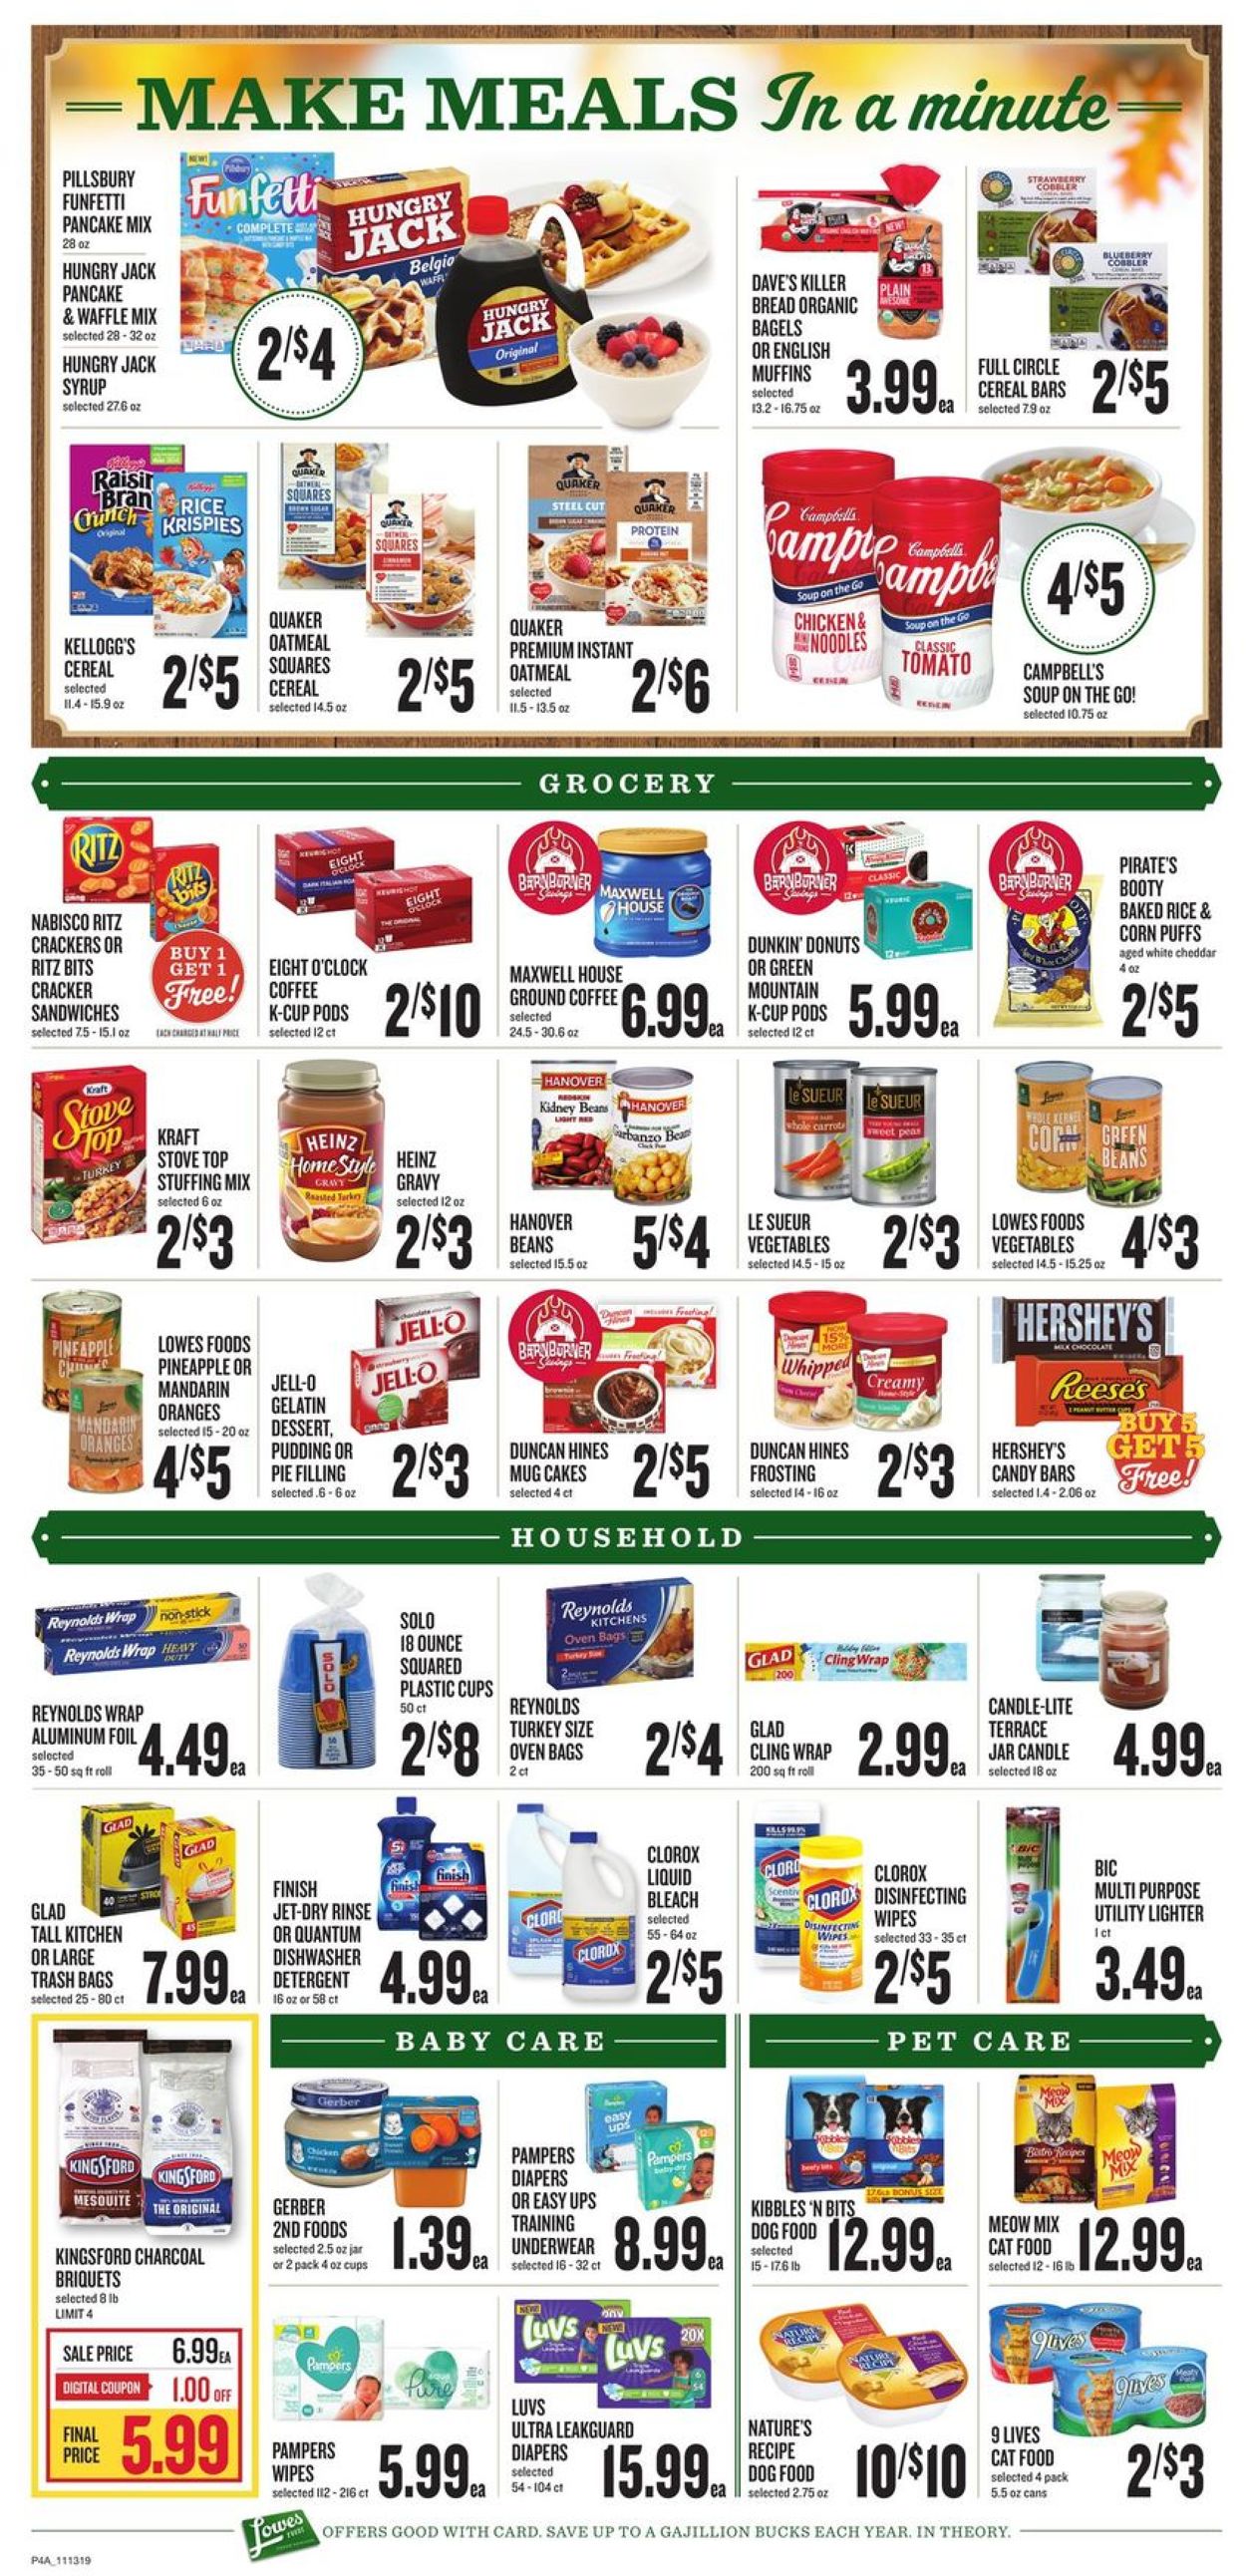 Lowes Foods - Holiday Ad 2019 Weekly Ad Circular - valid 11/13-11/19/2019 (Page 7)